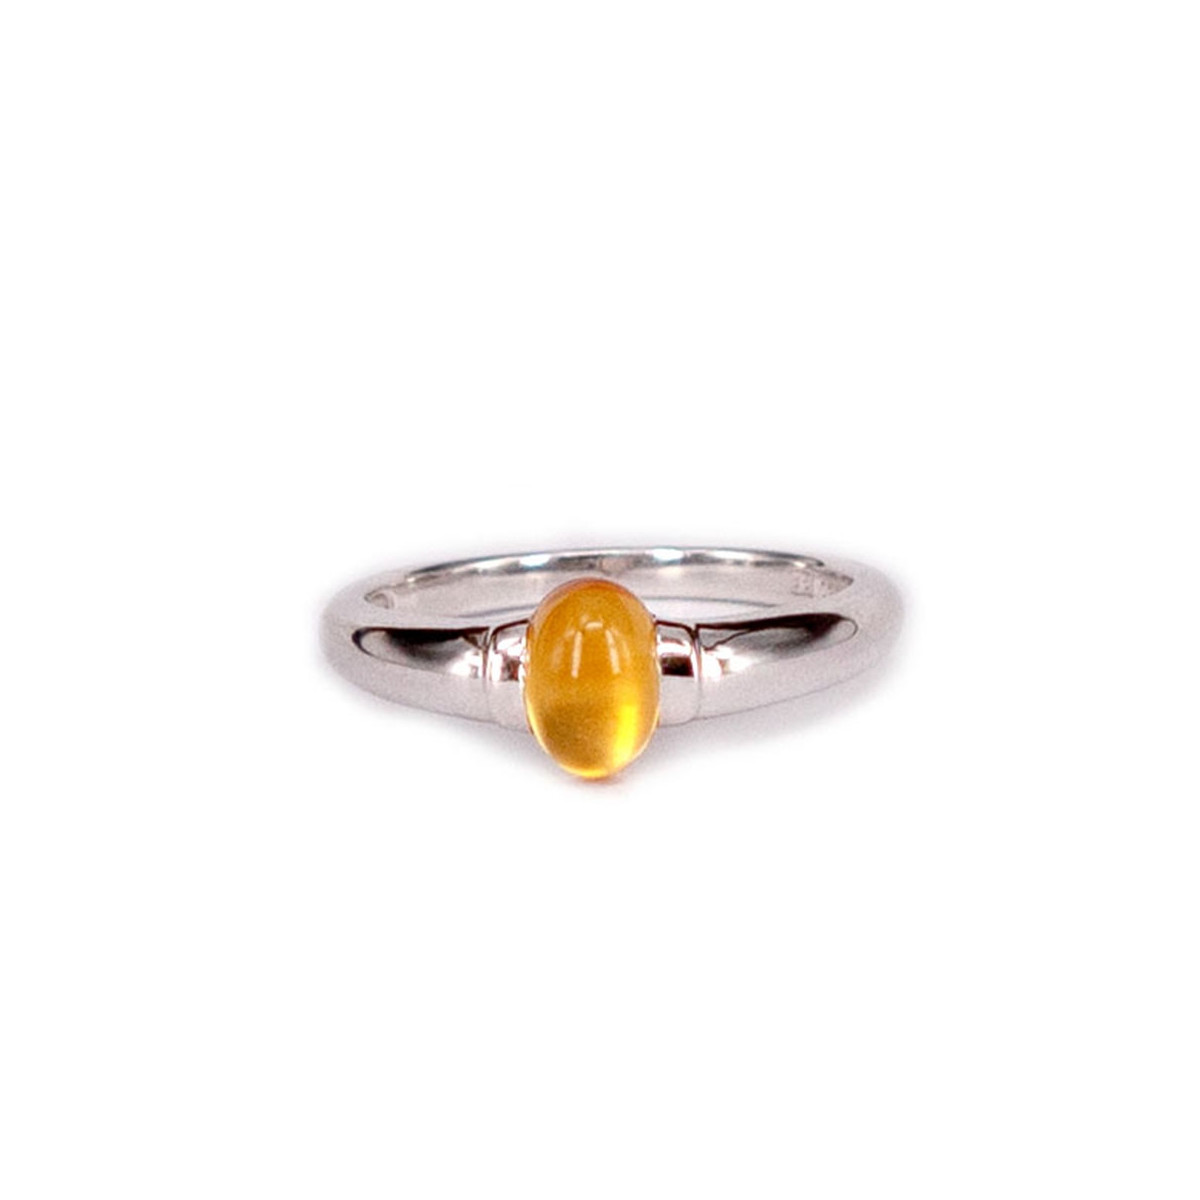 RING WHITE GOLD AND CITRINE